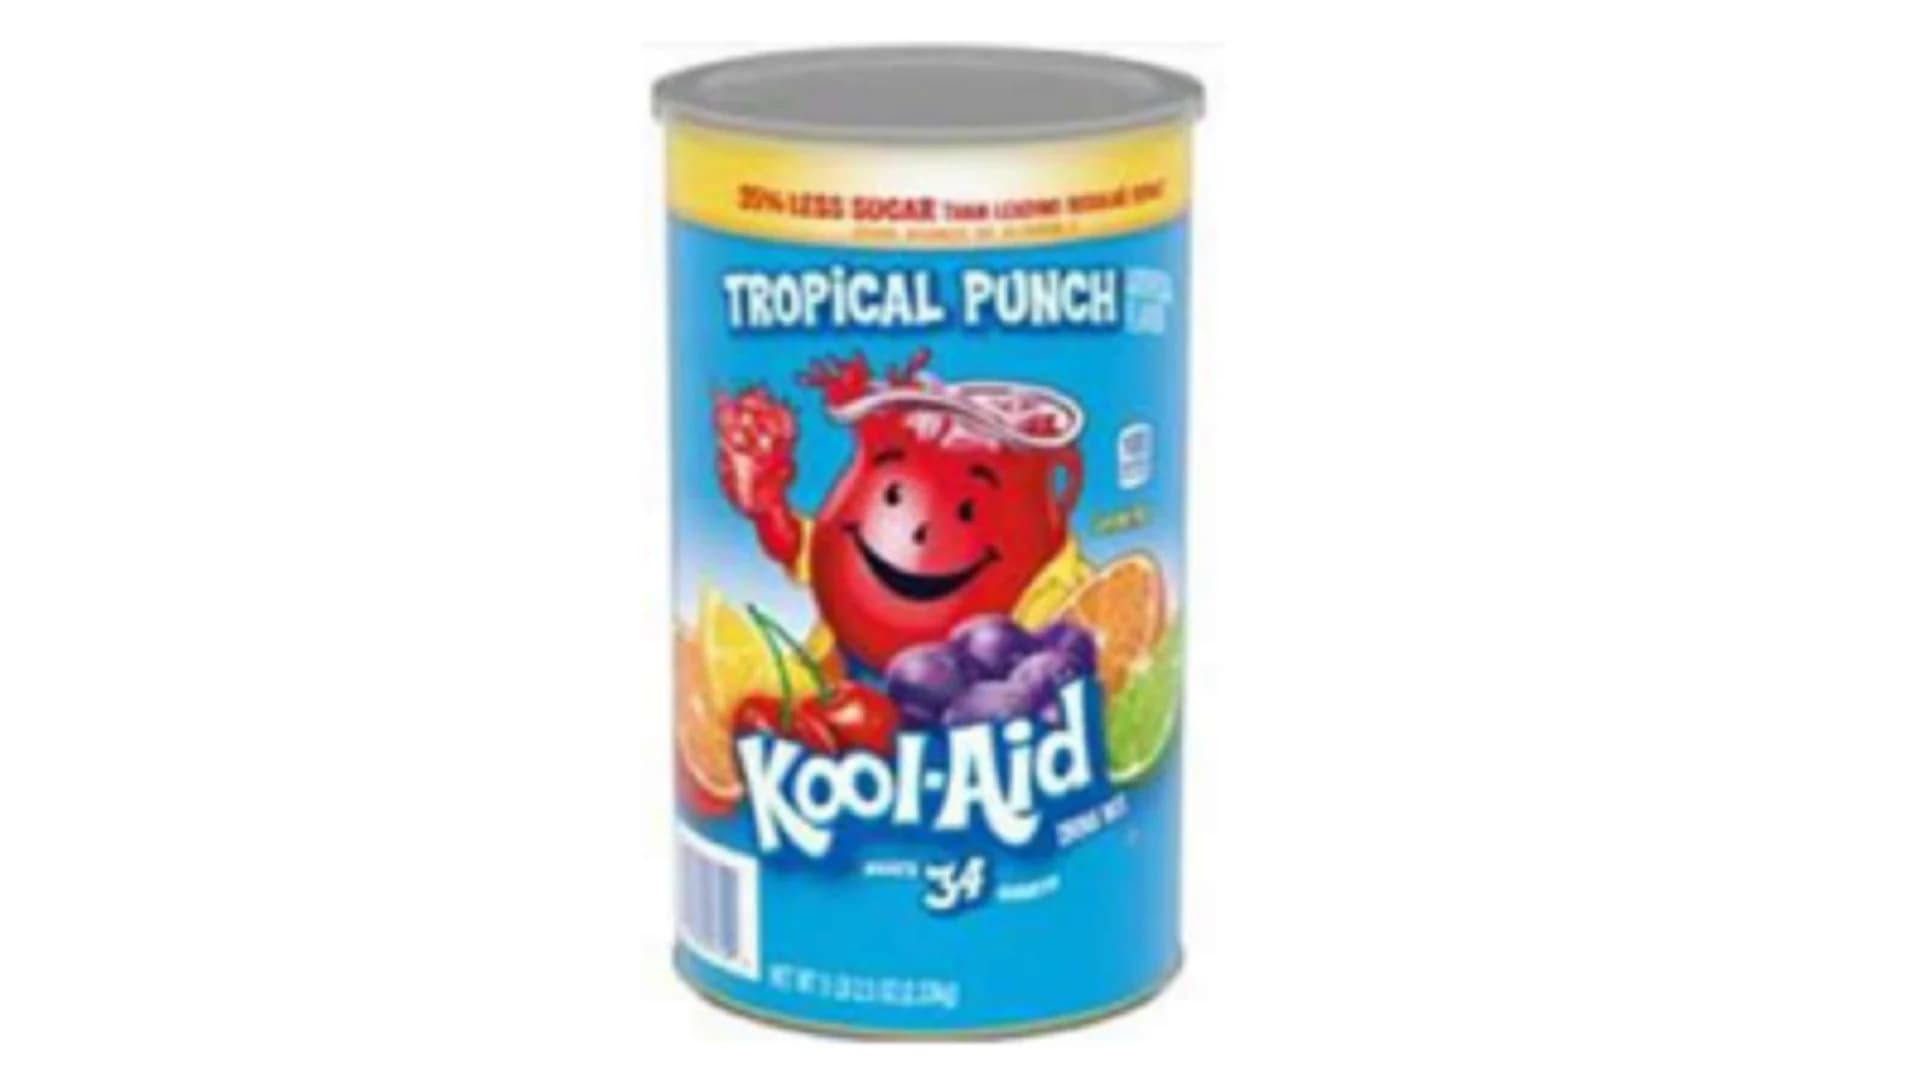 Costco recalls Kool-Aid mix that may contain small metal or glass pieces